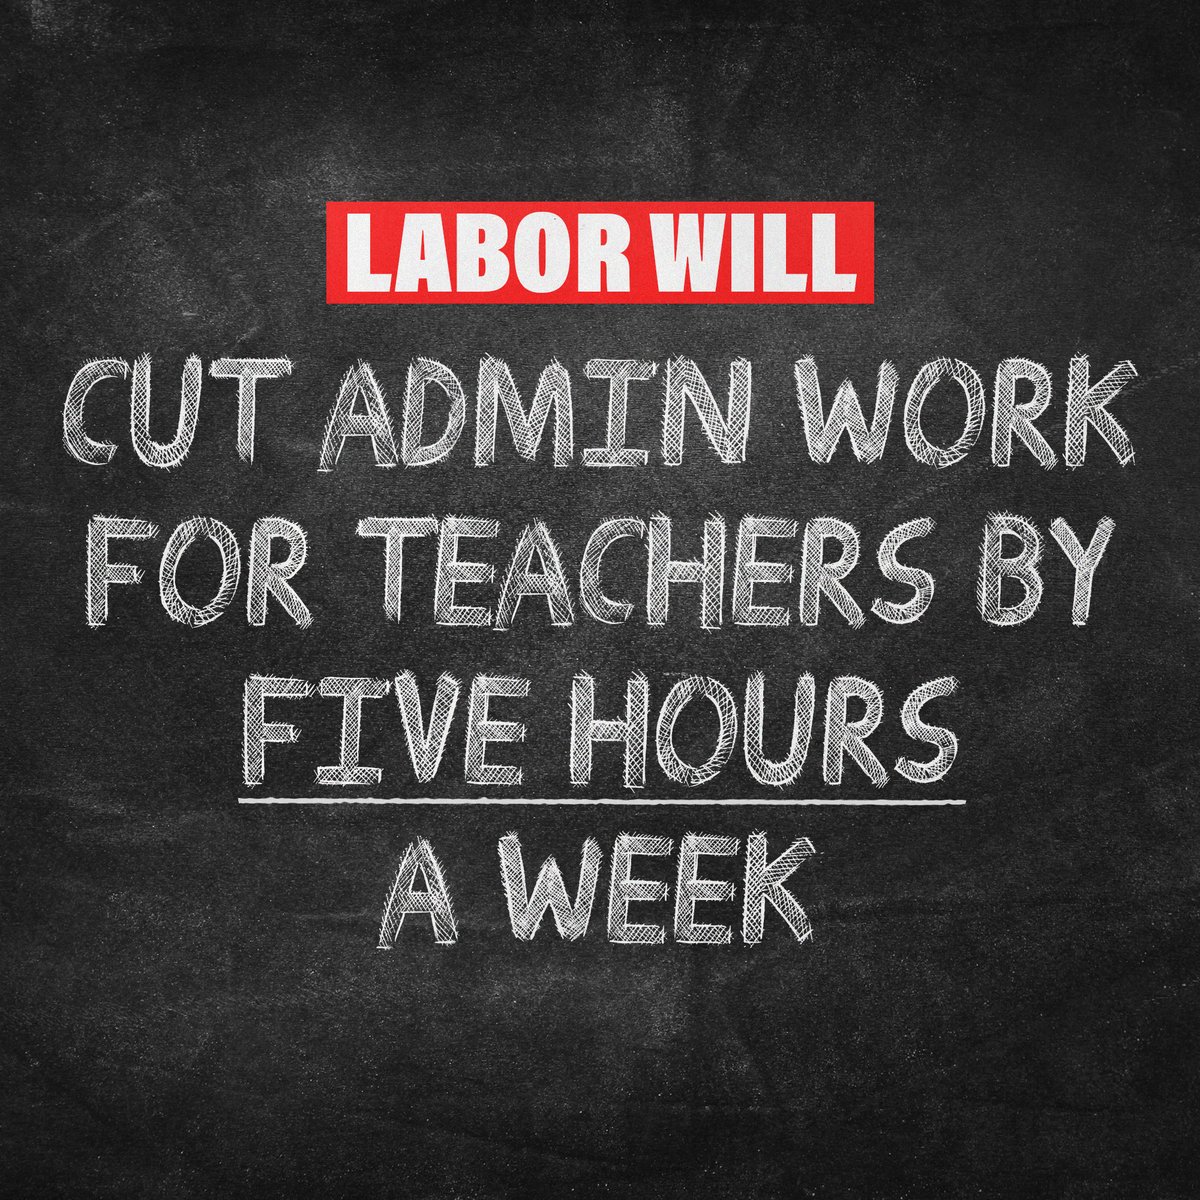 We'll get teachers back to doing what they do best - teaching our kids! Cutting admin work for teachers by five hours a week. For too long, teachers in our state have been forced to spend more time documenting classes than teaching them. Under a Labor Government - that ends.